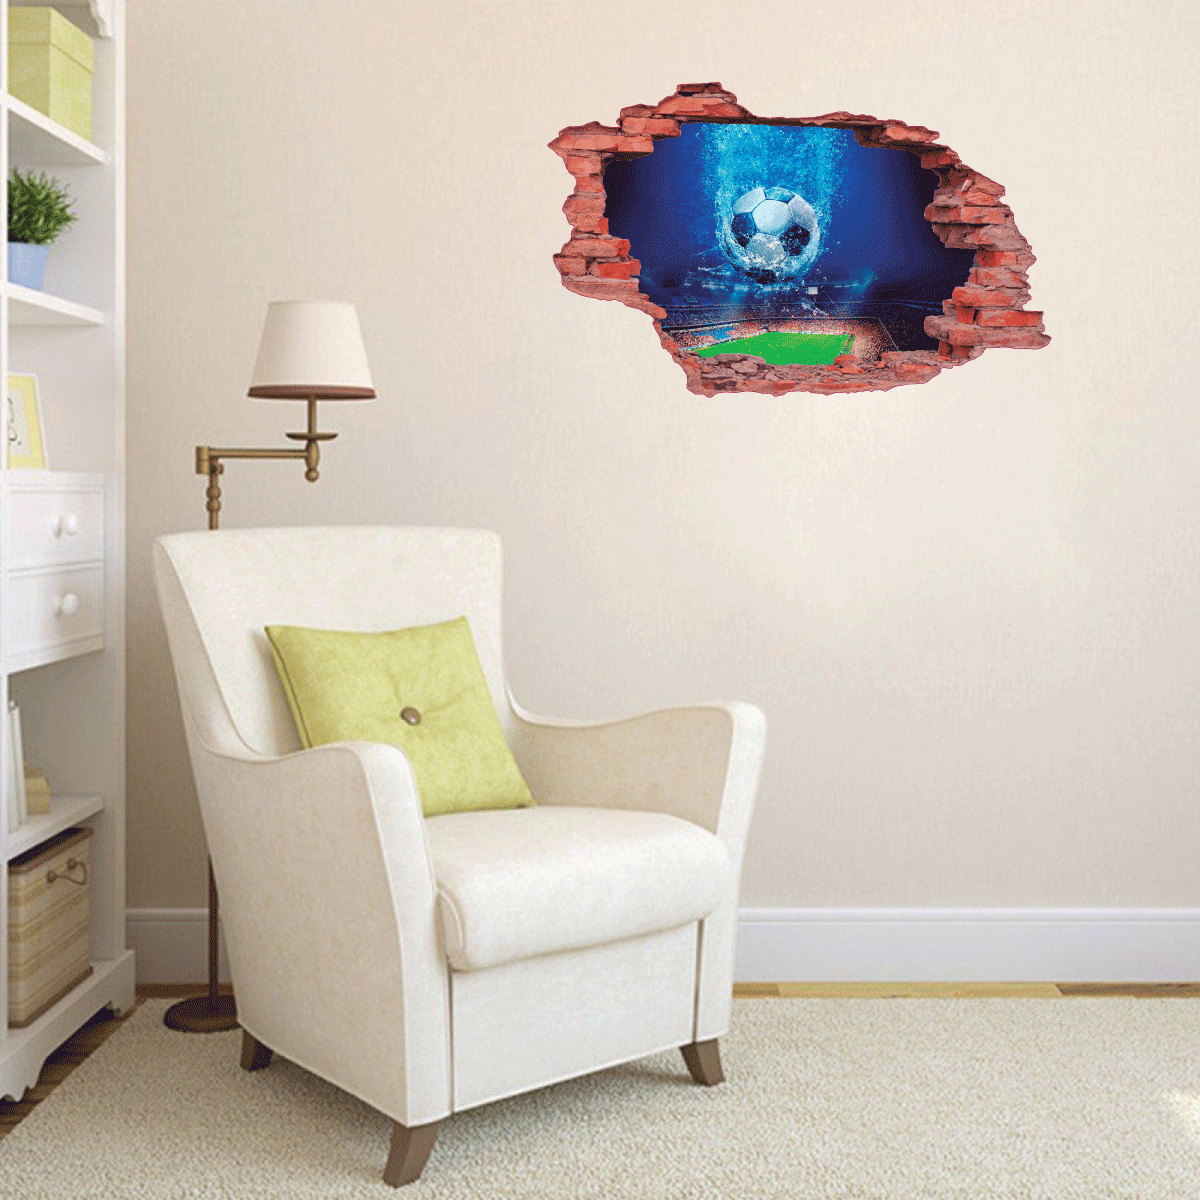 Decor for the room wall, 3D sticker - soccer ball 